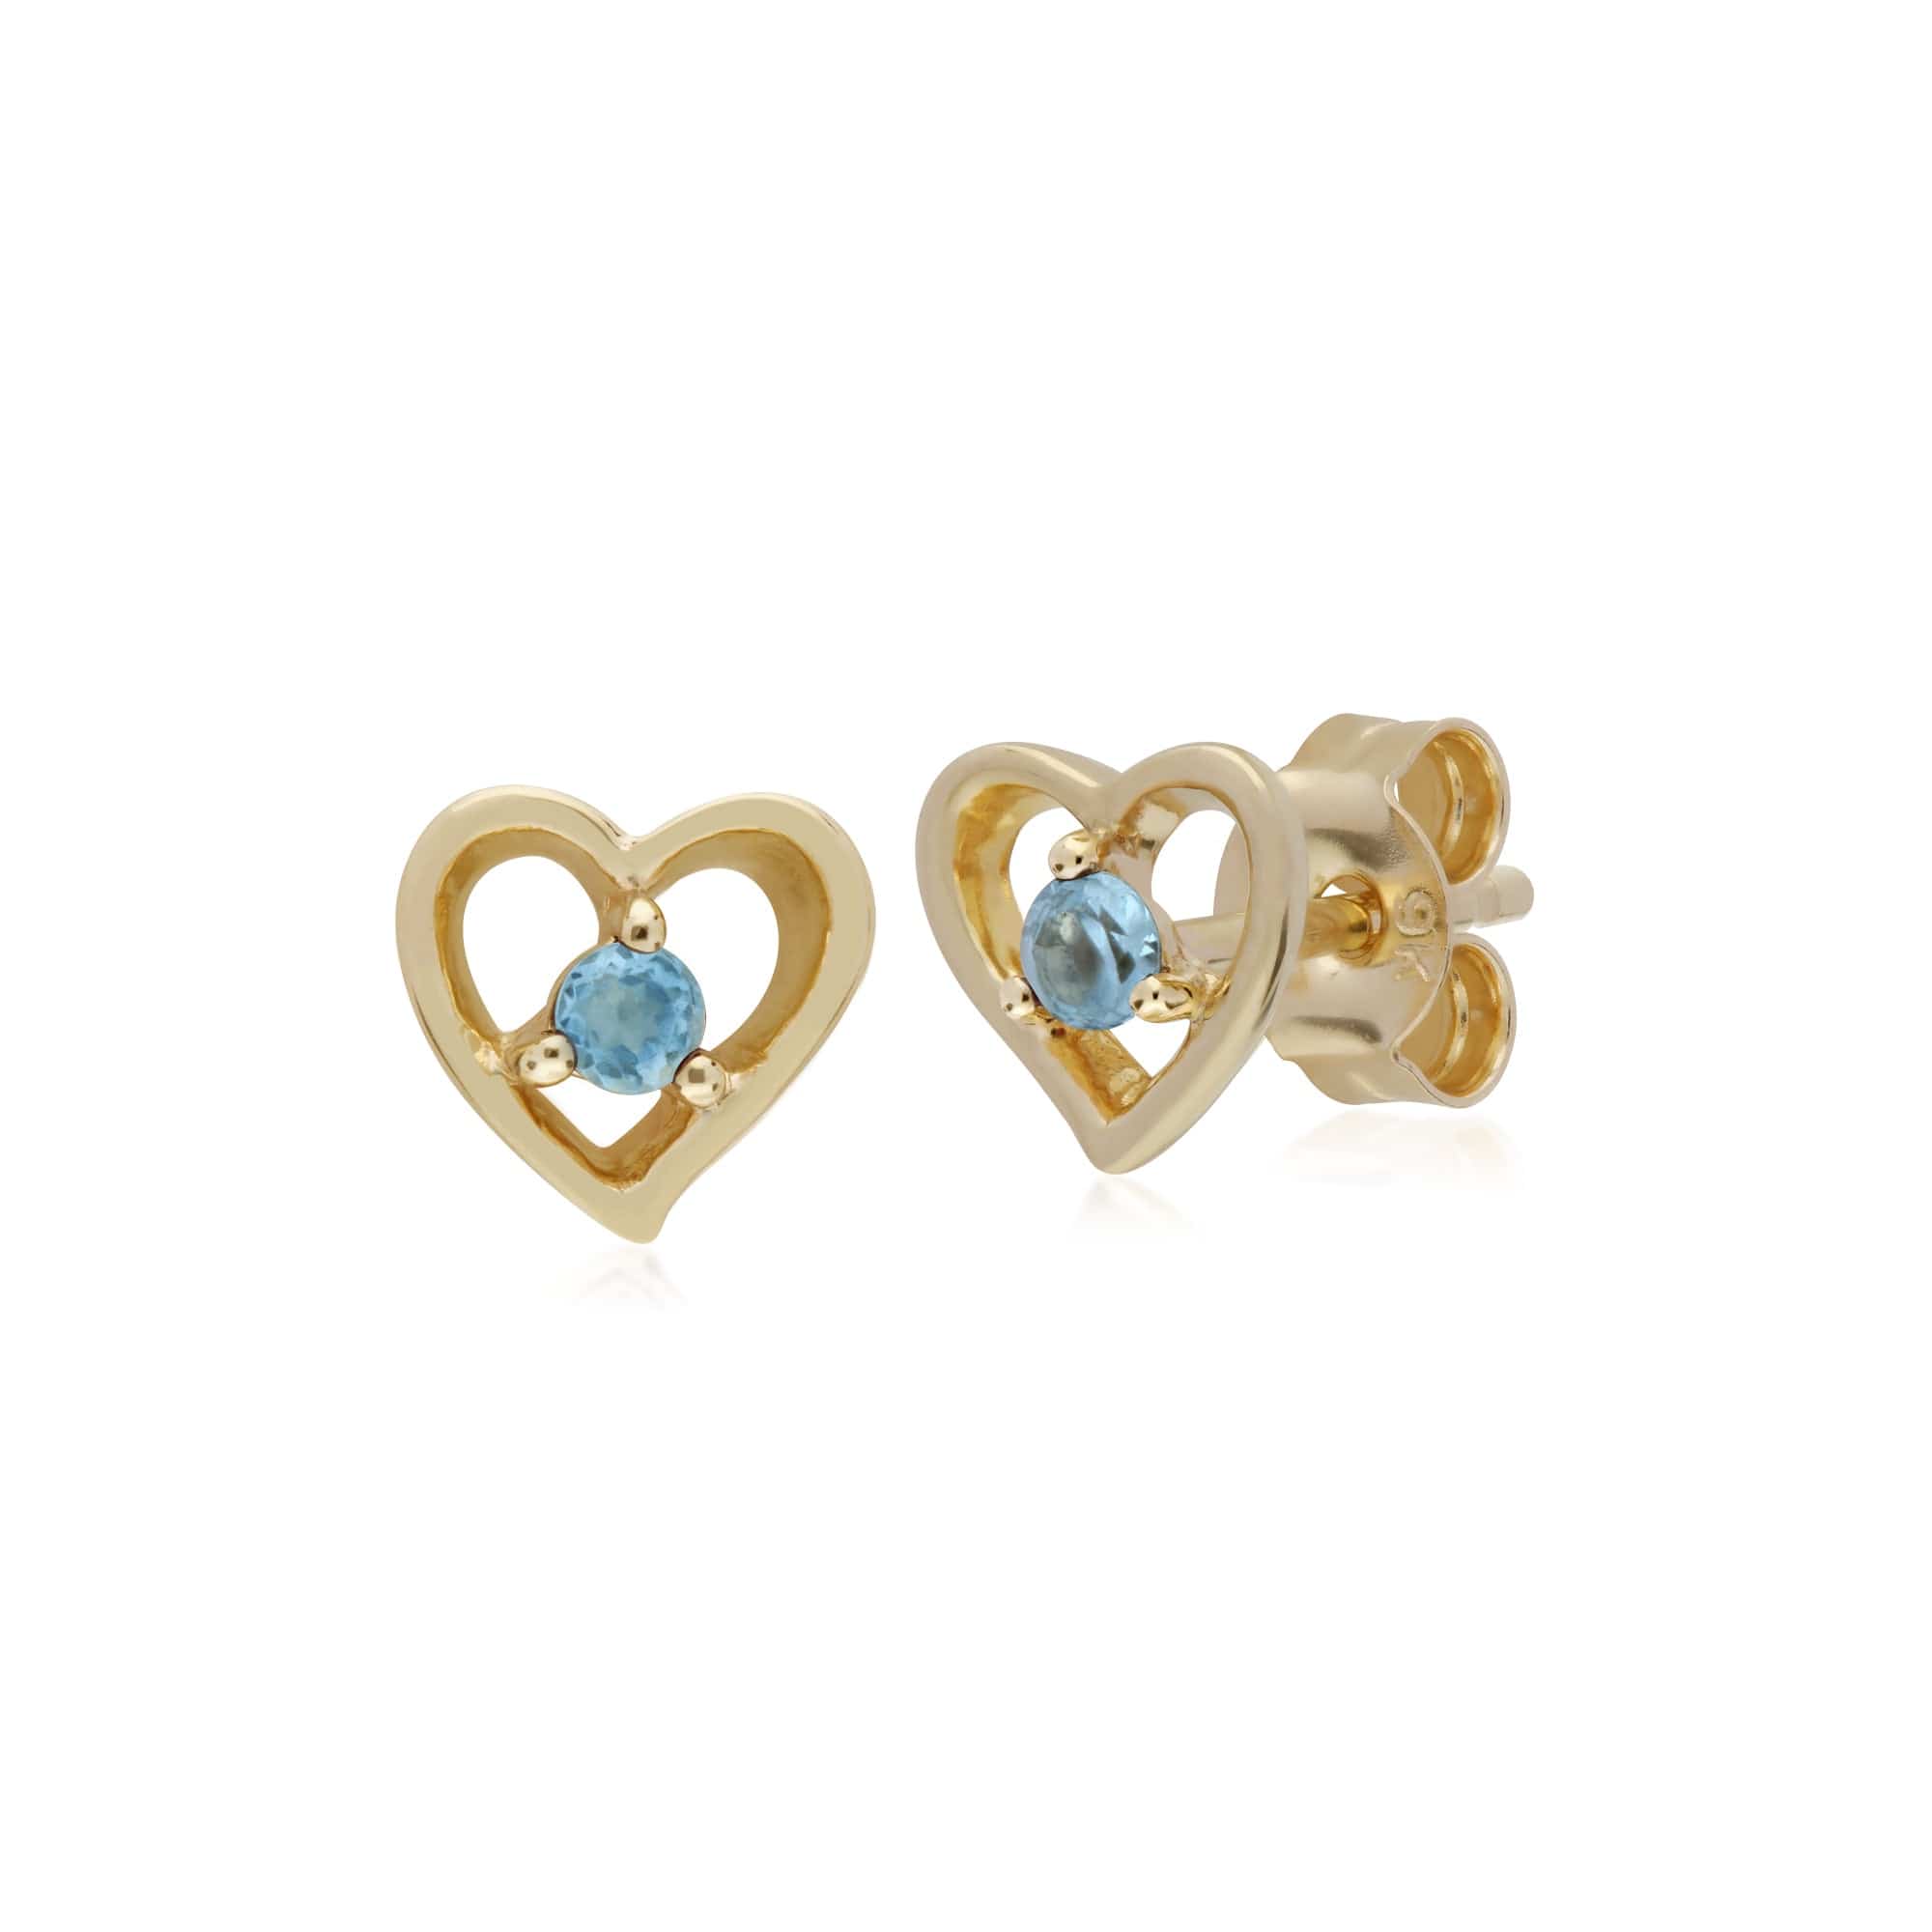 135E1521099-135P1875089 Classic Round Aquamarine Single Stone Heart Stud Earrings & Necklace Set in 9ct Yellow Gold 2